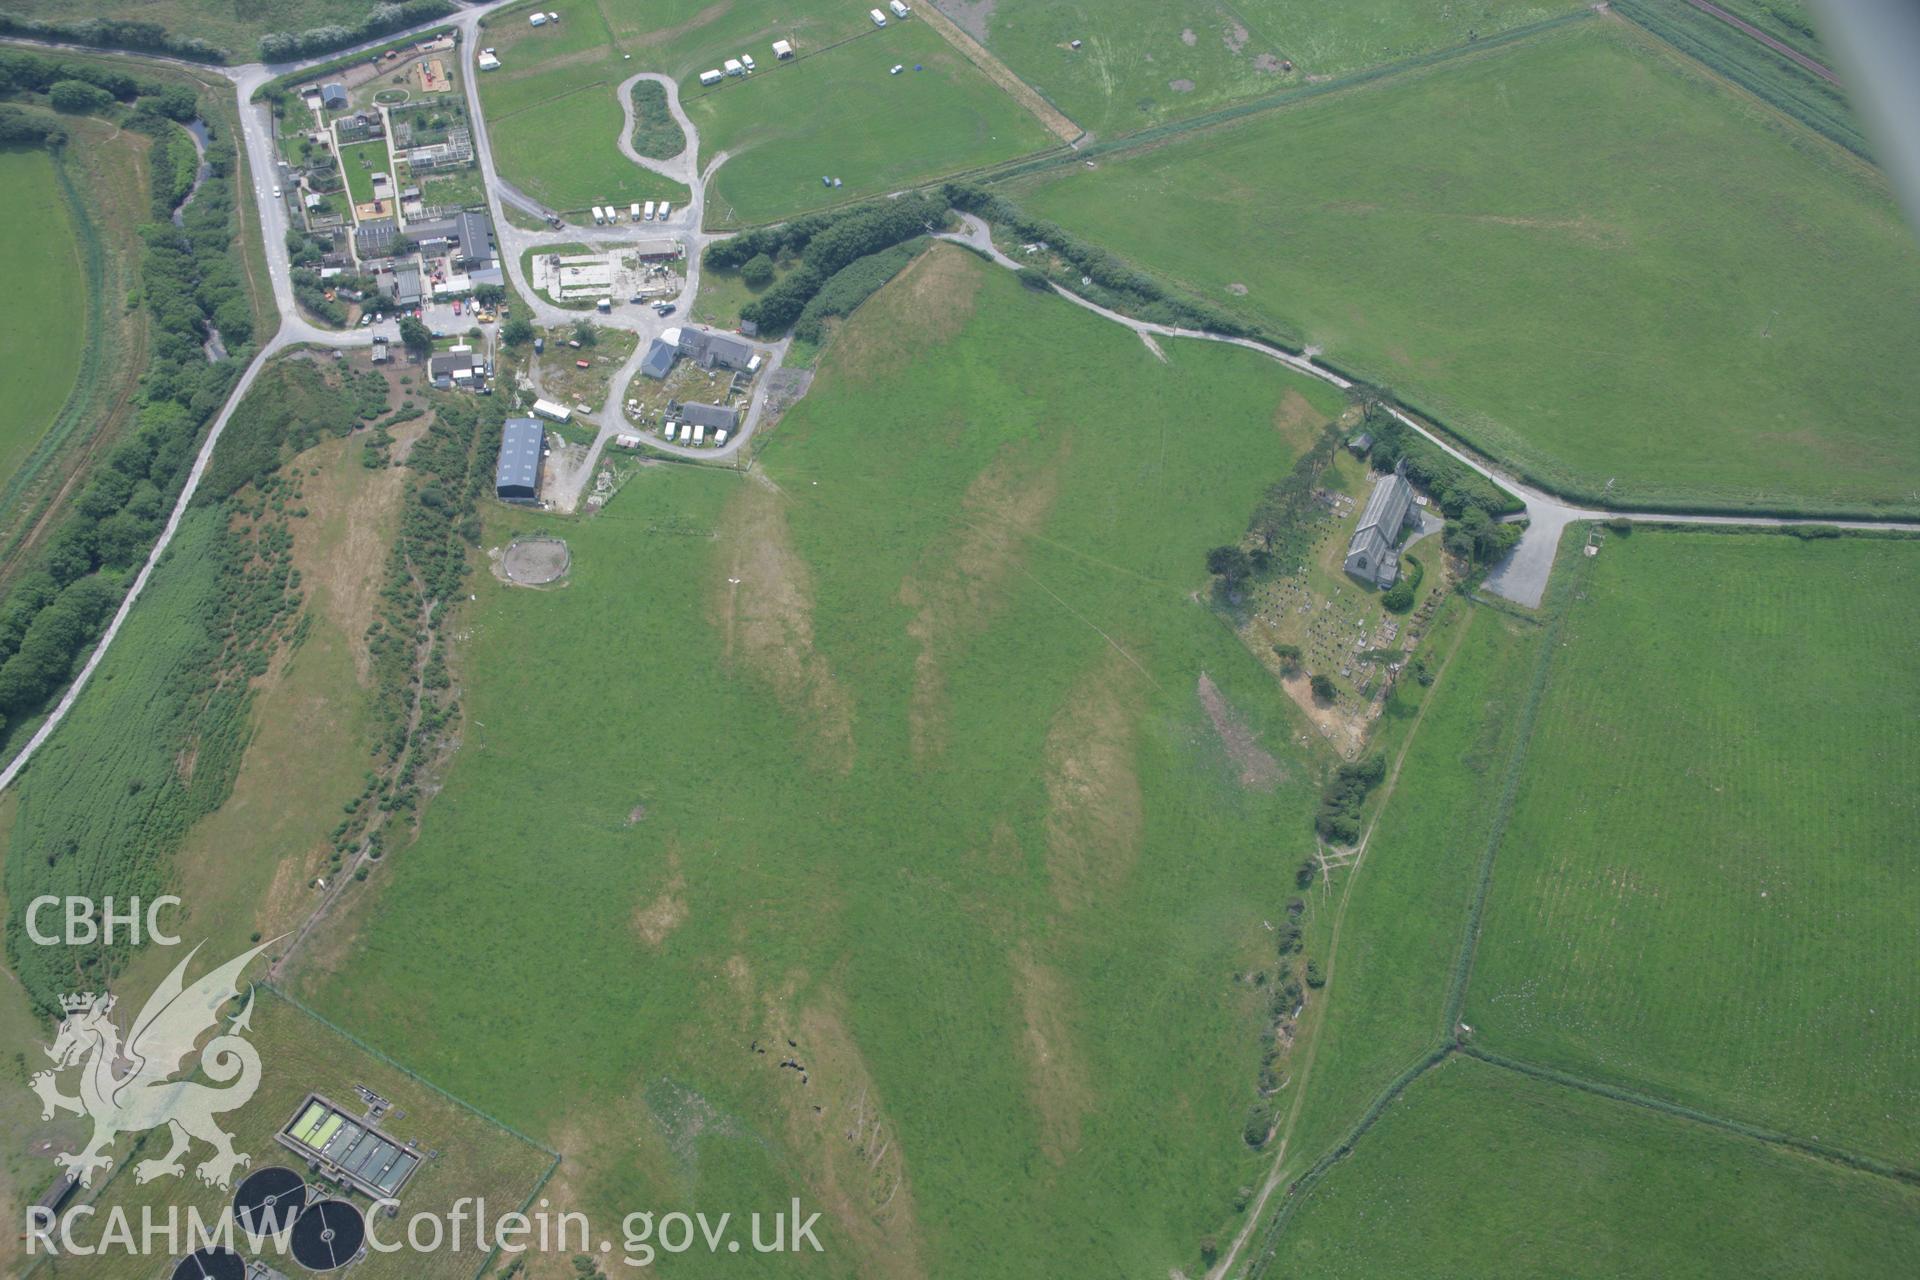 RCAHMW colour oblique aerial photograph of St Matthews Parish Church, Ynysfergi. Taken on 04 July 2006 by Toby Driver.